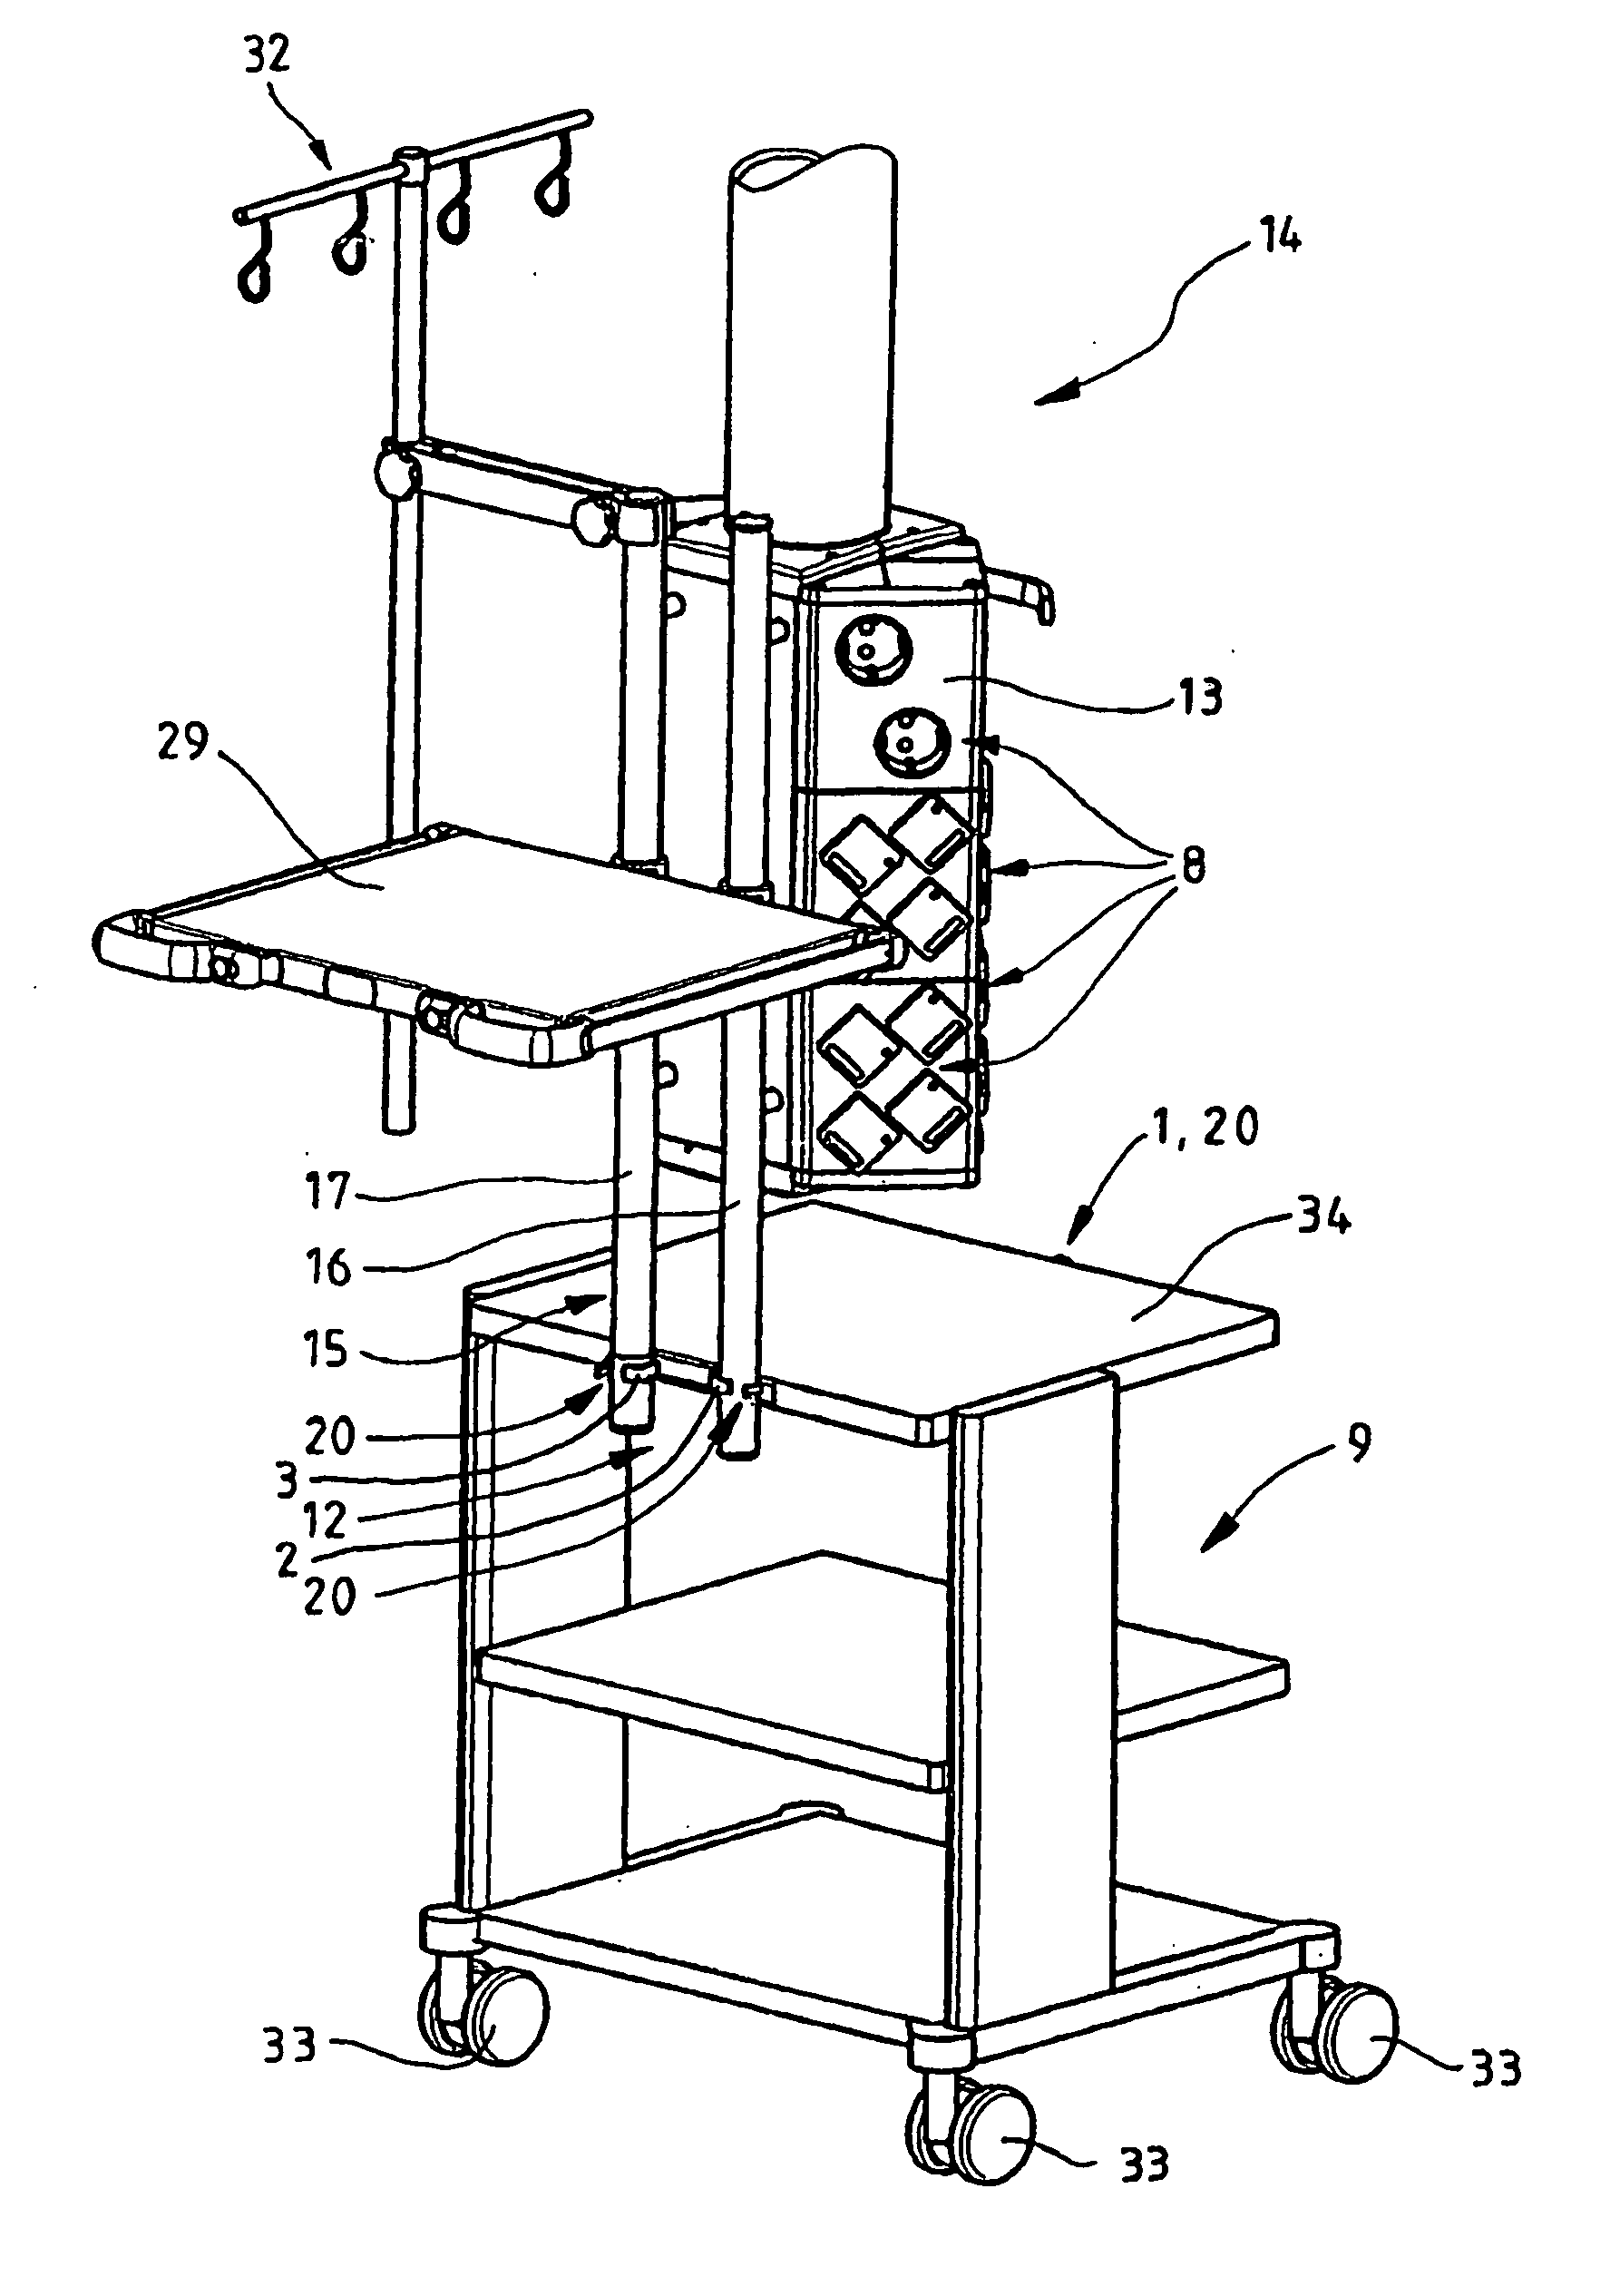 Coupling device of a transport cart with a structure of a supply panel for medical applications